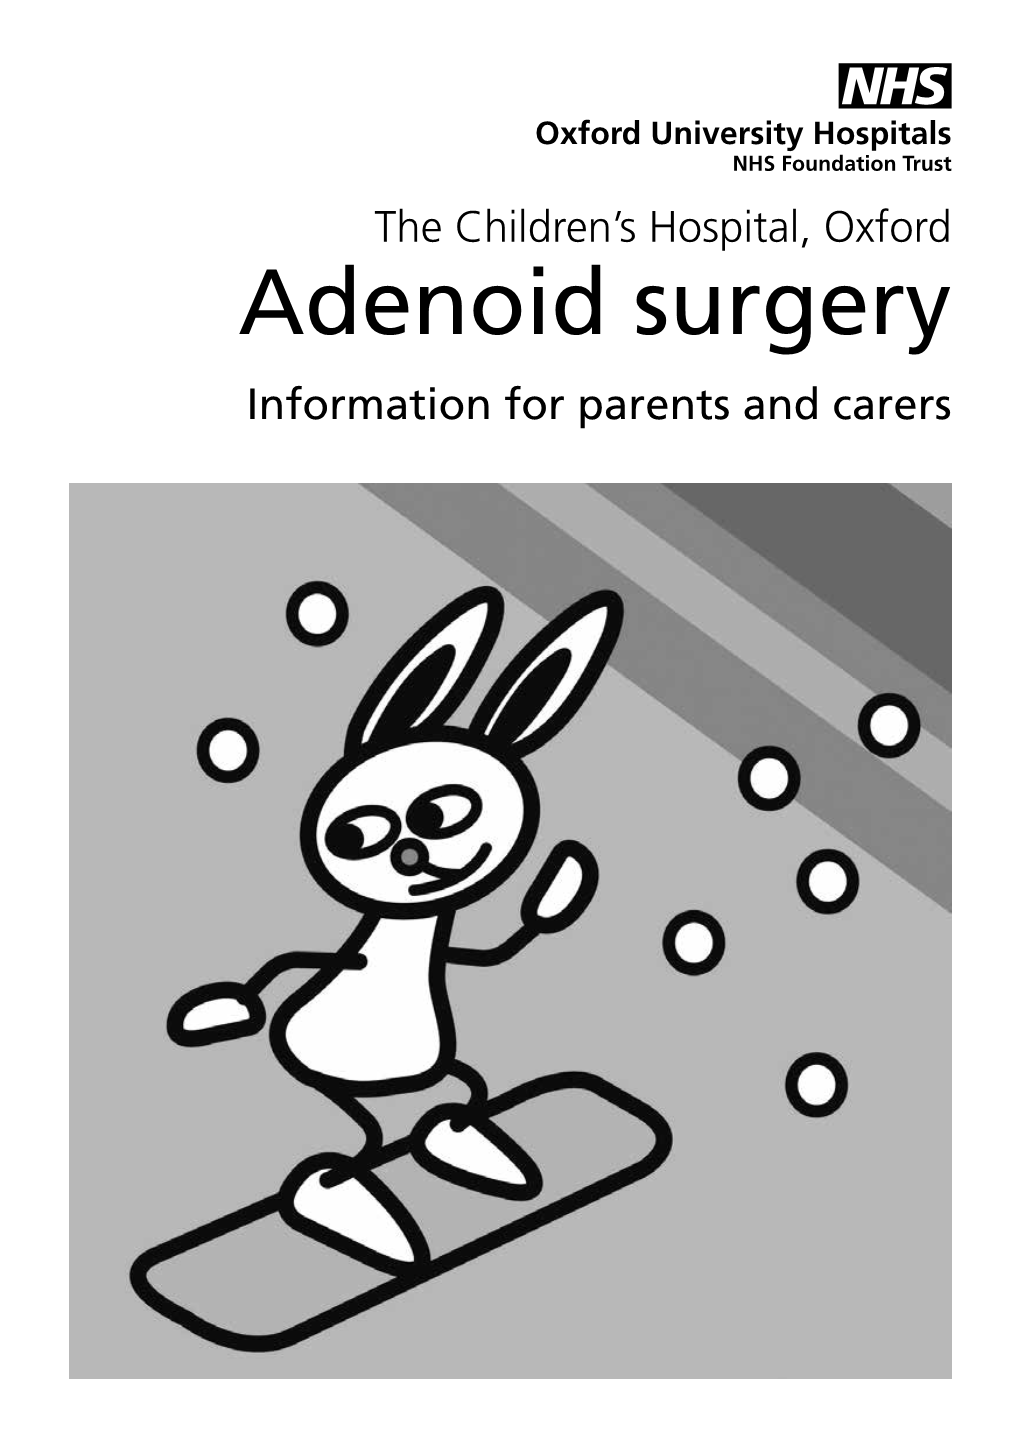 Adenoid Surgery Information for Parents and Carers What Are Adenoids? the Adenoids Are Small Lumps of Lymphoid Tissue Which Sit at the Back of the Nose